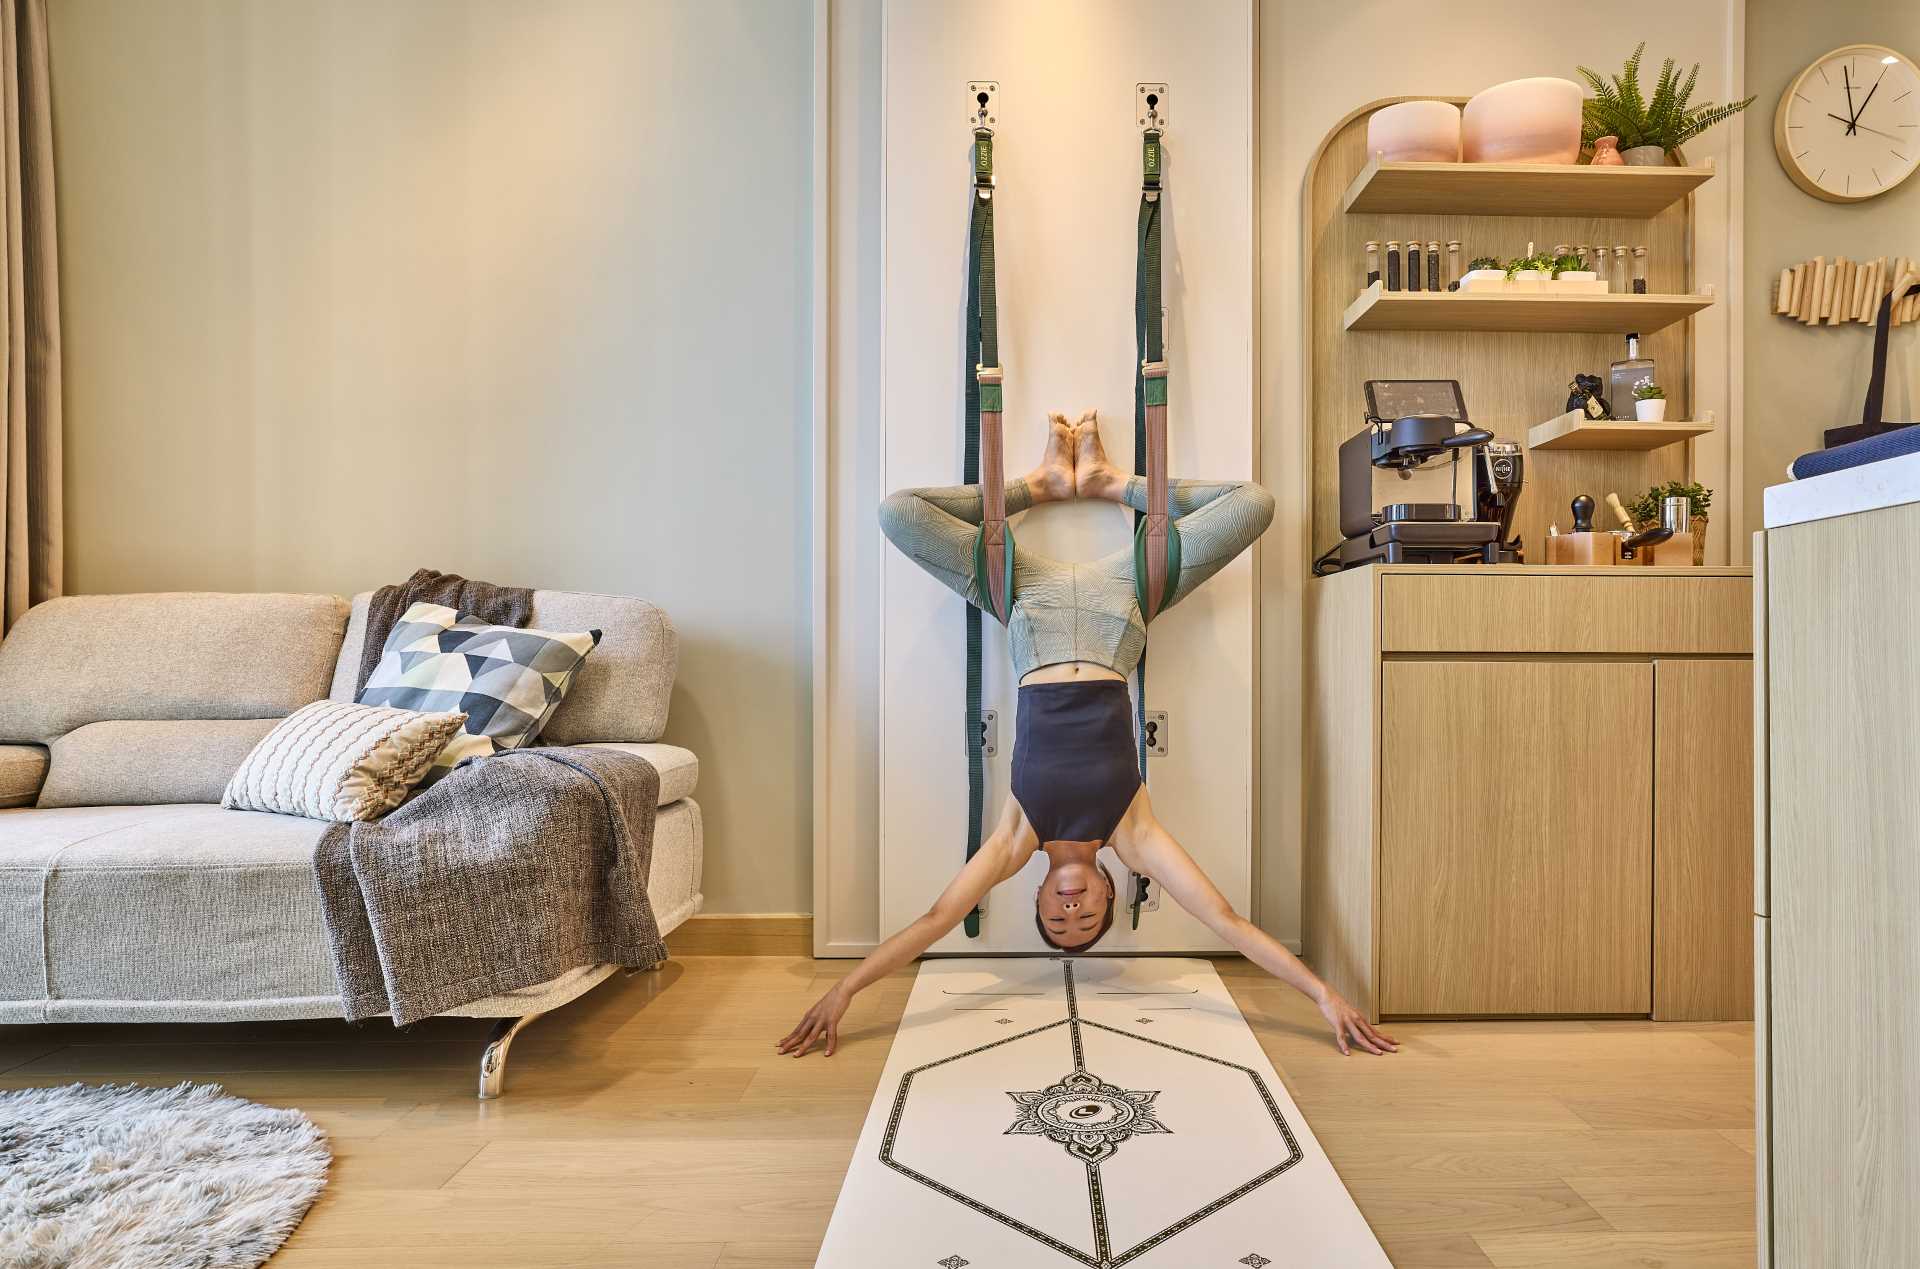 A small and modern apartment in Hong Kong includes a yoga wall and coffee bar.